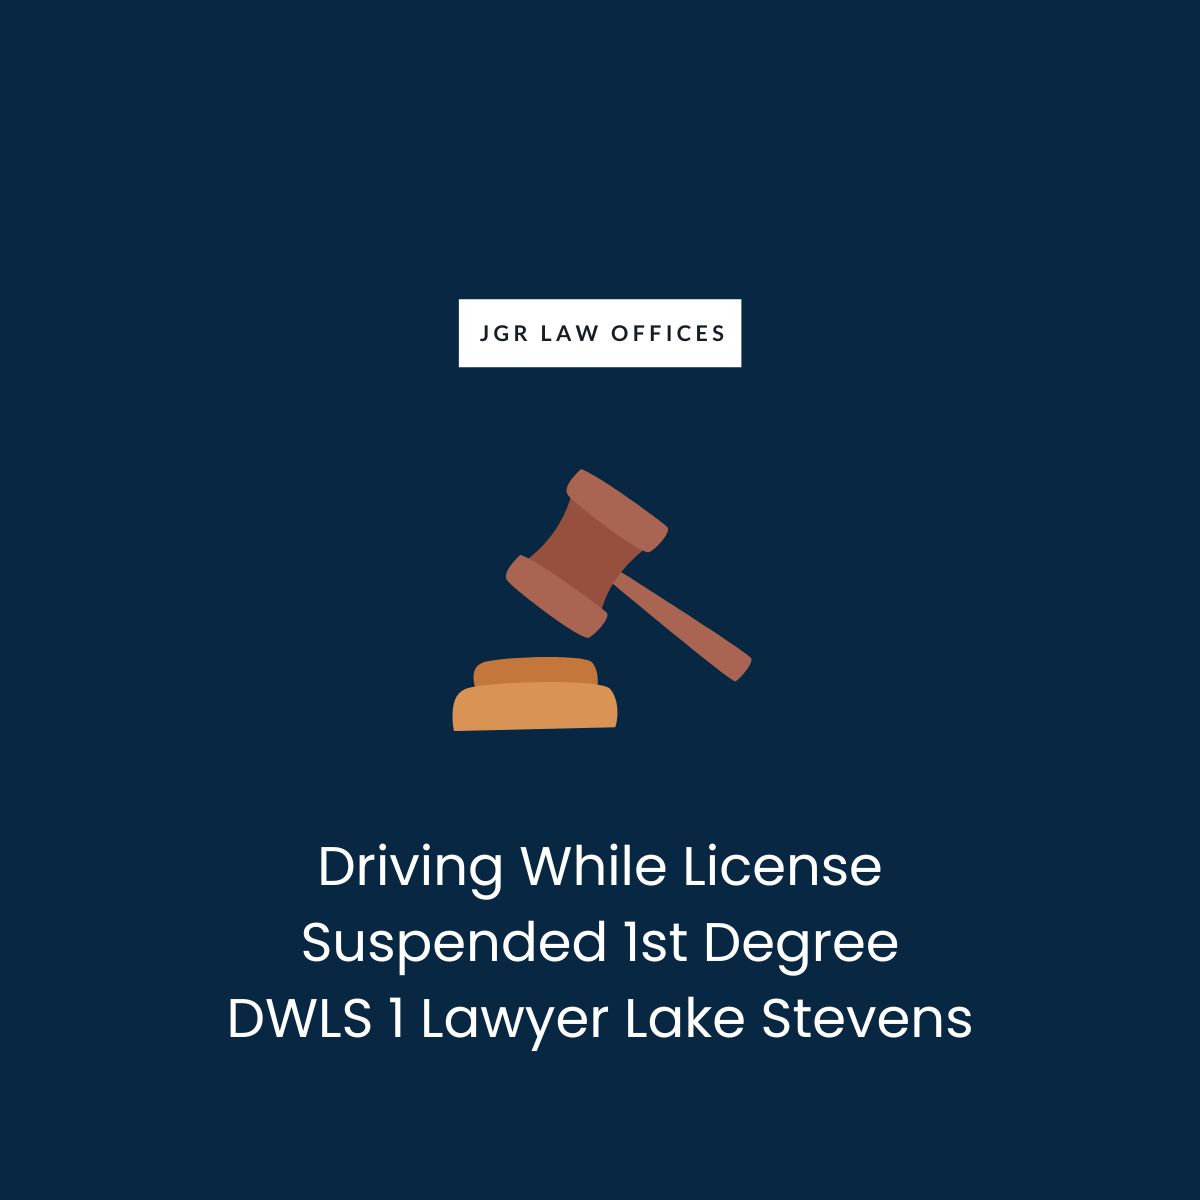 Driving While License Suspended 1st Degree DWLS 1 Lawyer Lake Stevens Driving While License Suspended 1st Degree DWLS 1 Driving While License Suspended 1st Degree DWLS 1